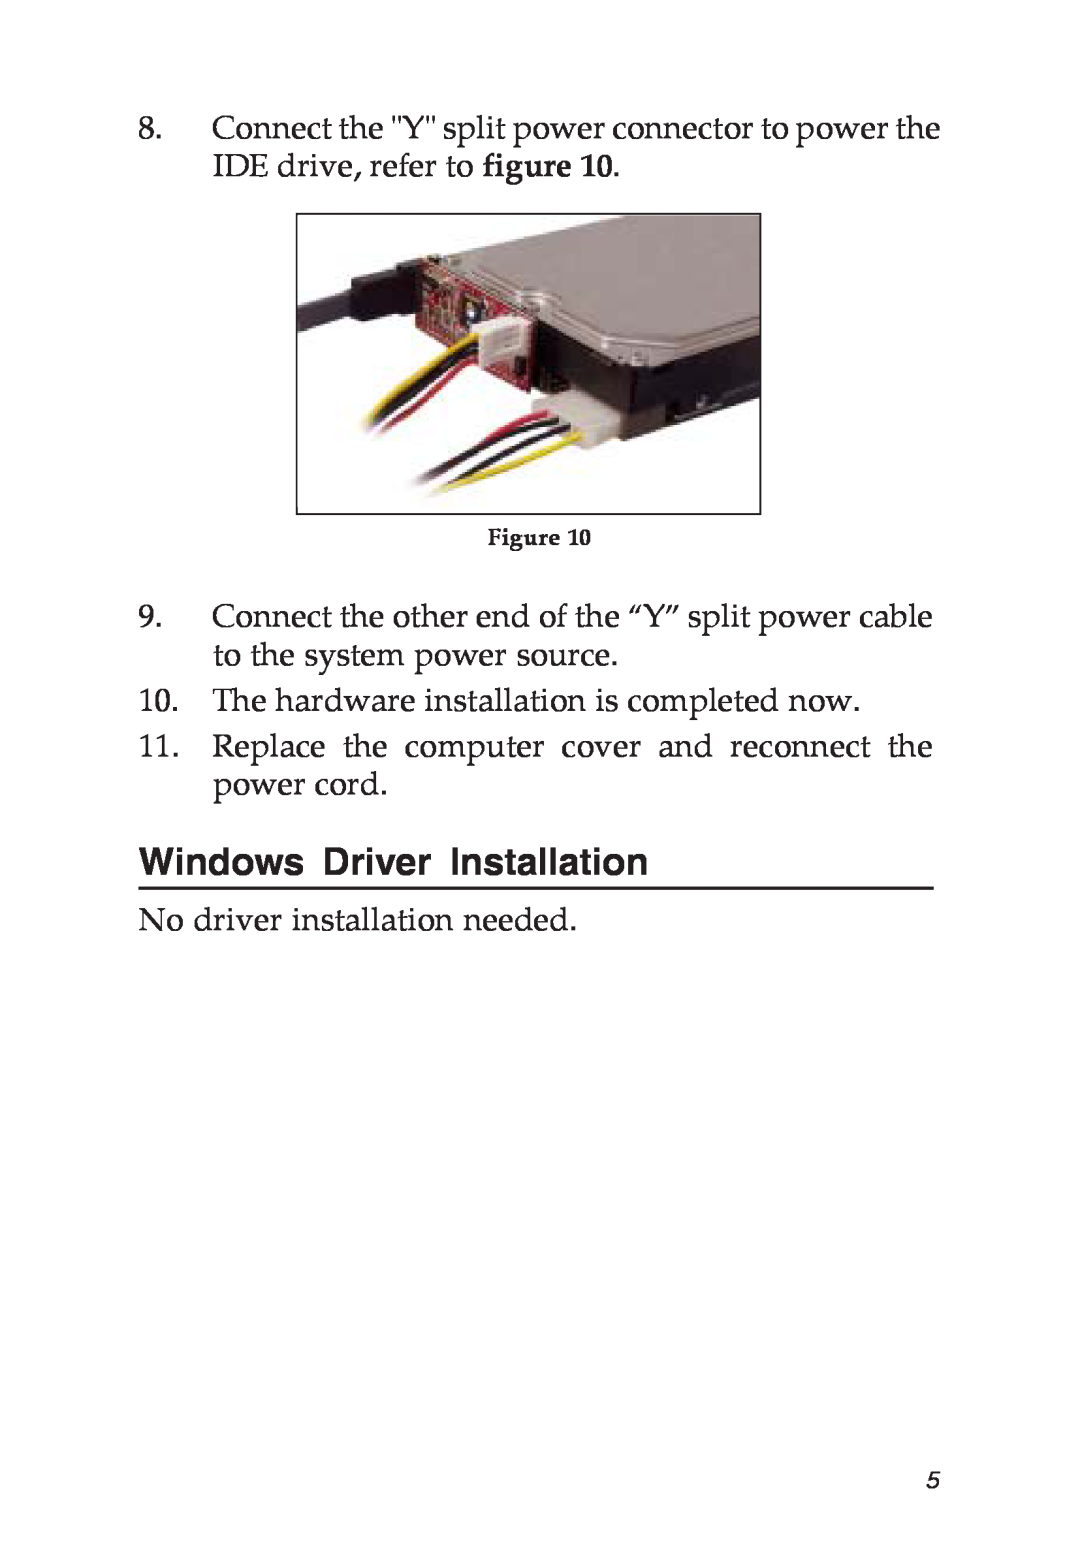 SIIG 04-0476A Windows Driver Installation, The hardware installation is completed now, No driver installation needed 